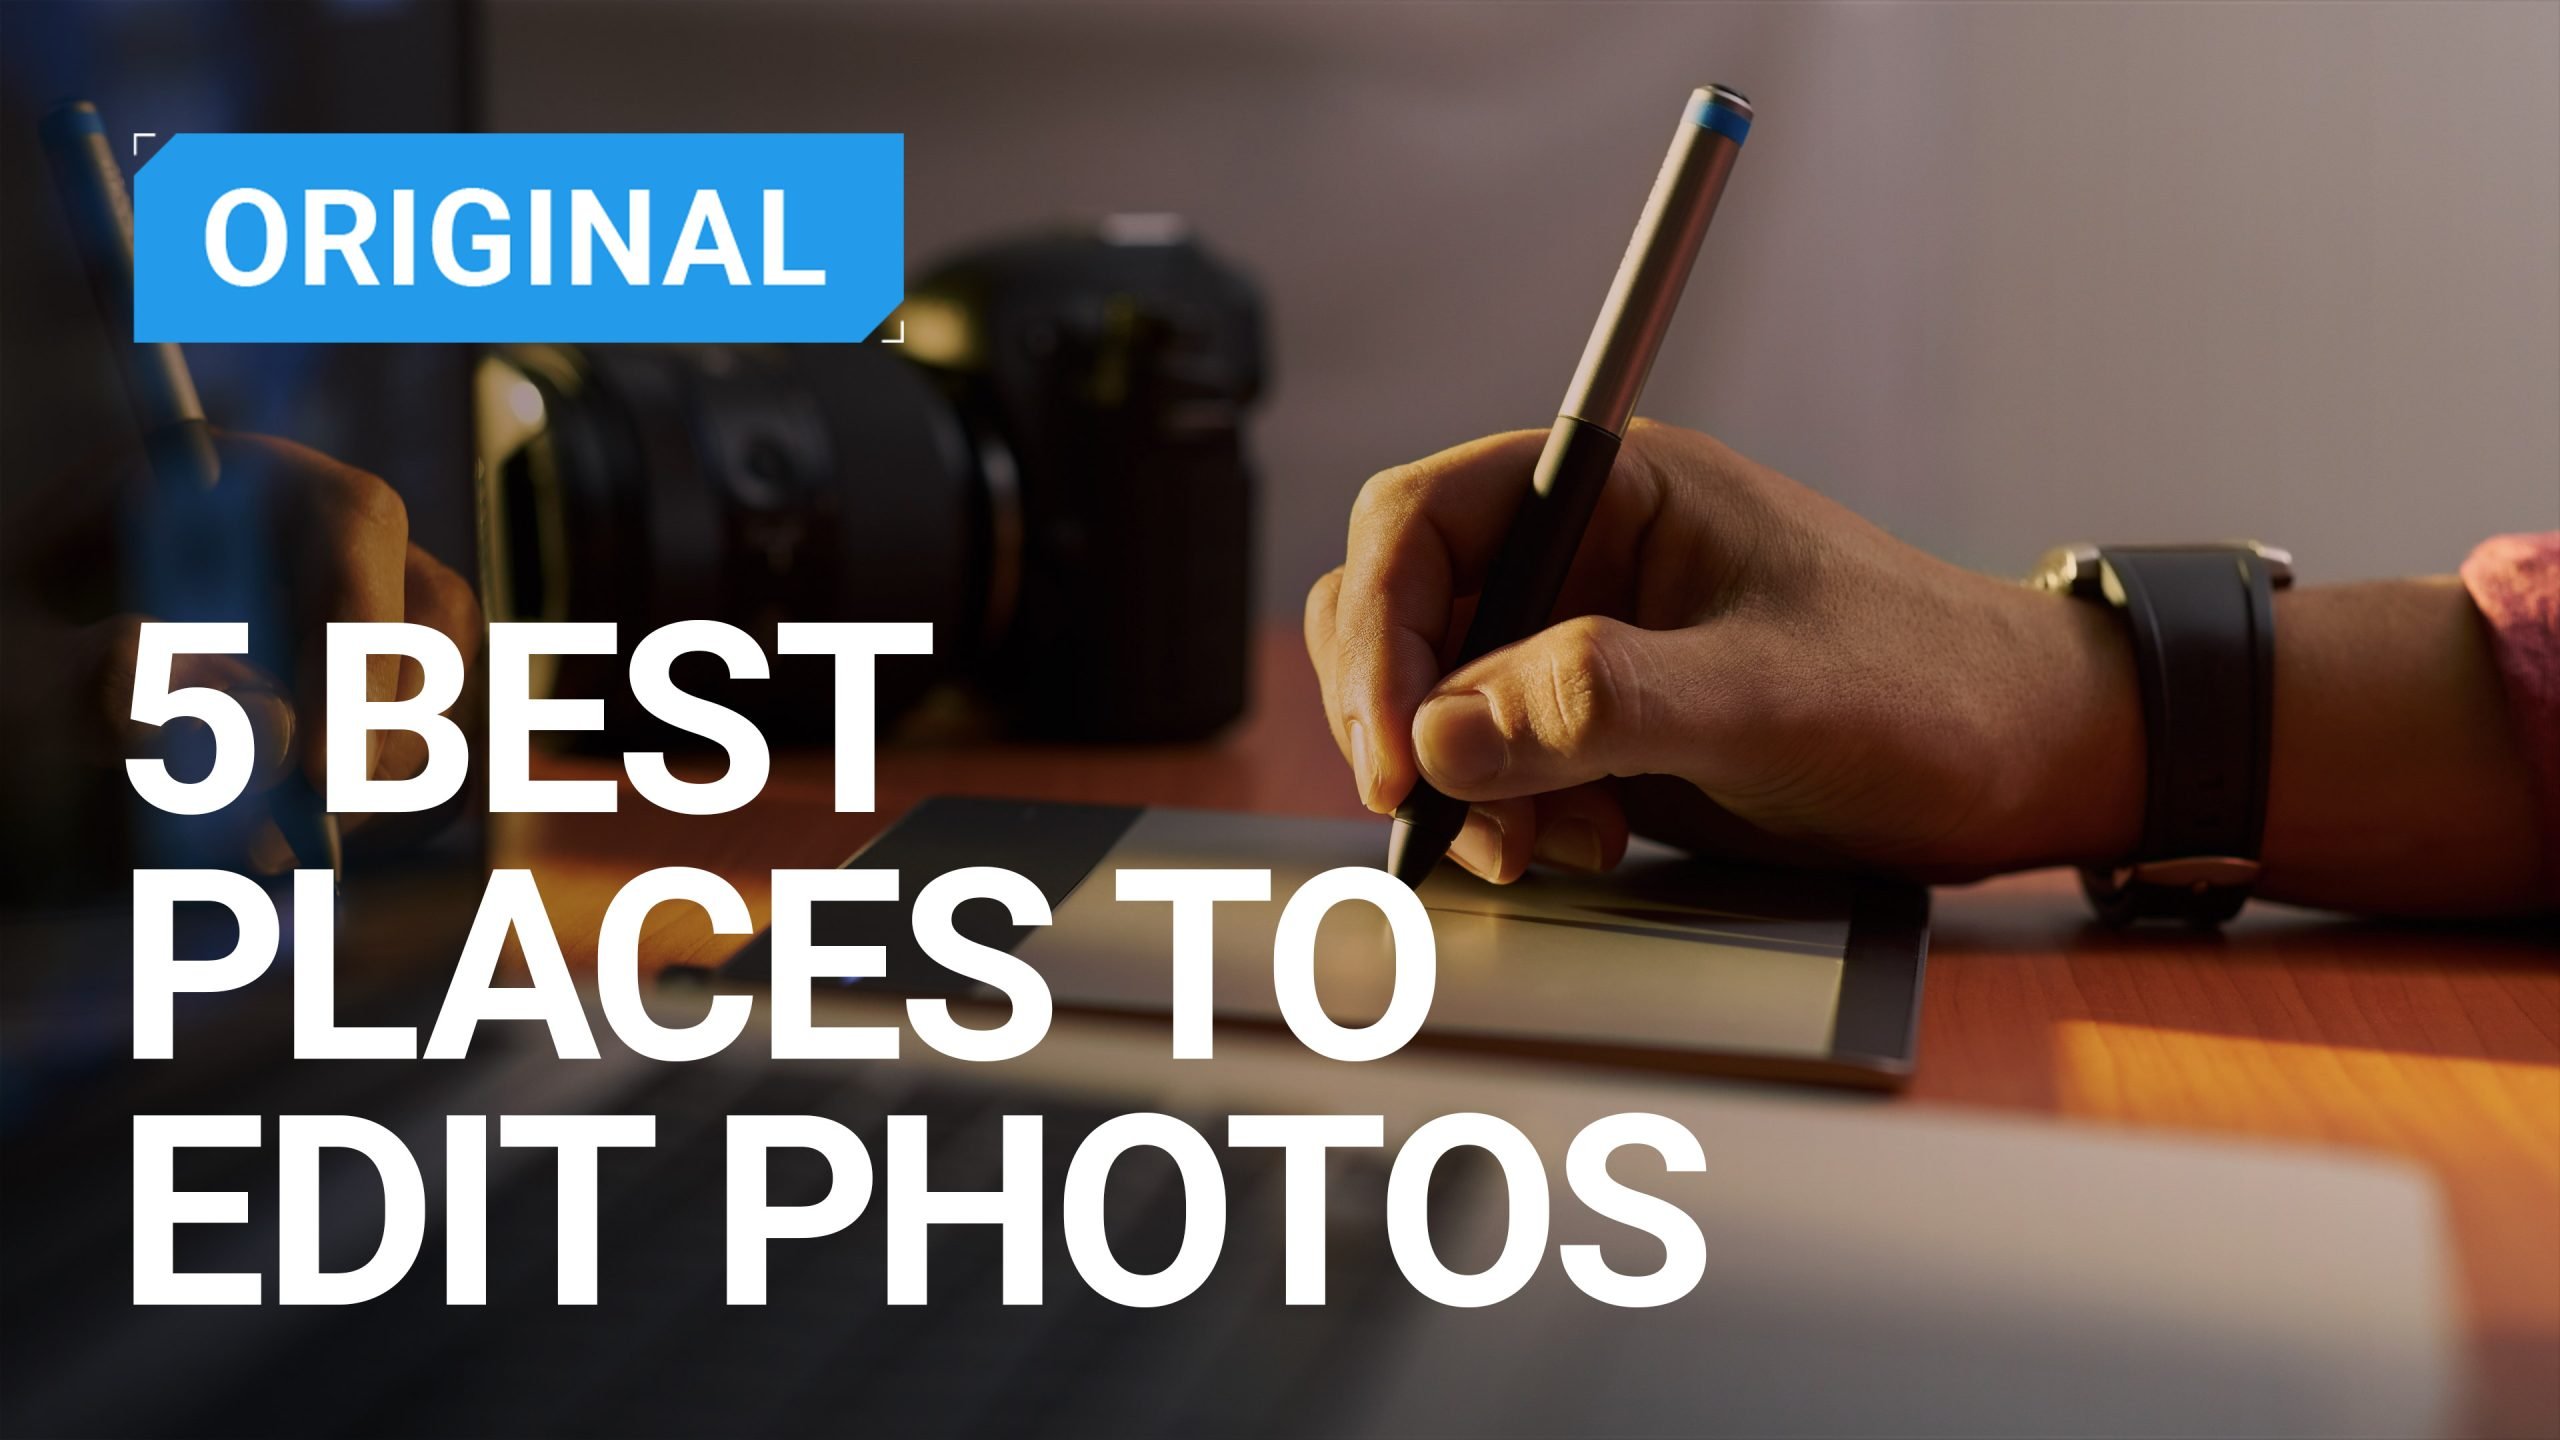 5 places to edit photos from to beat the working-from-home blues